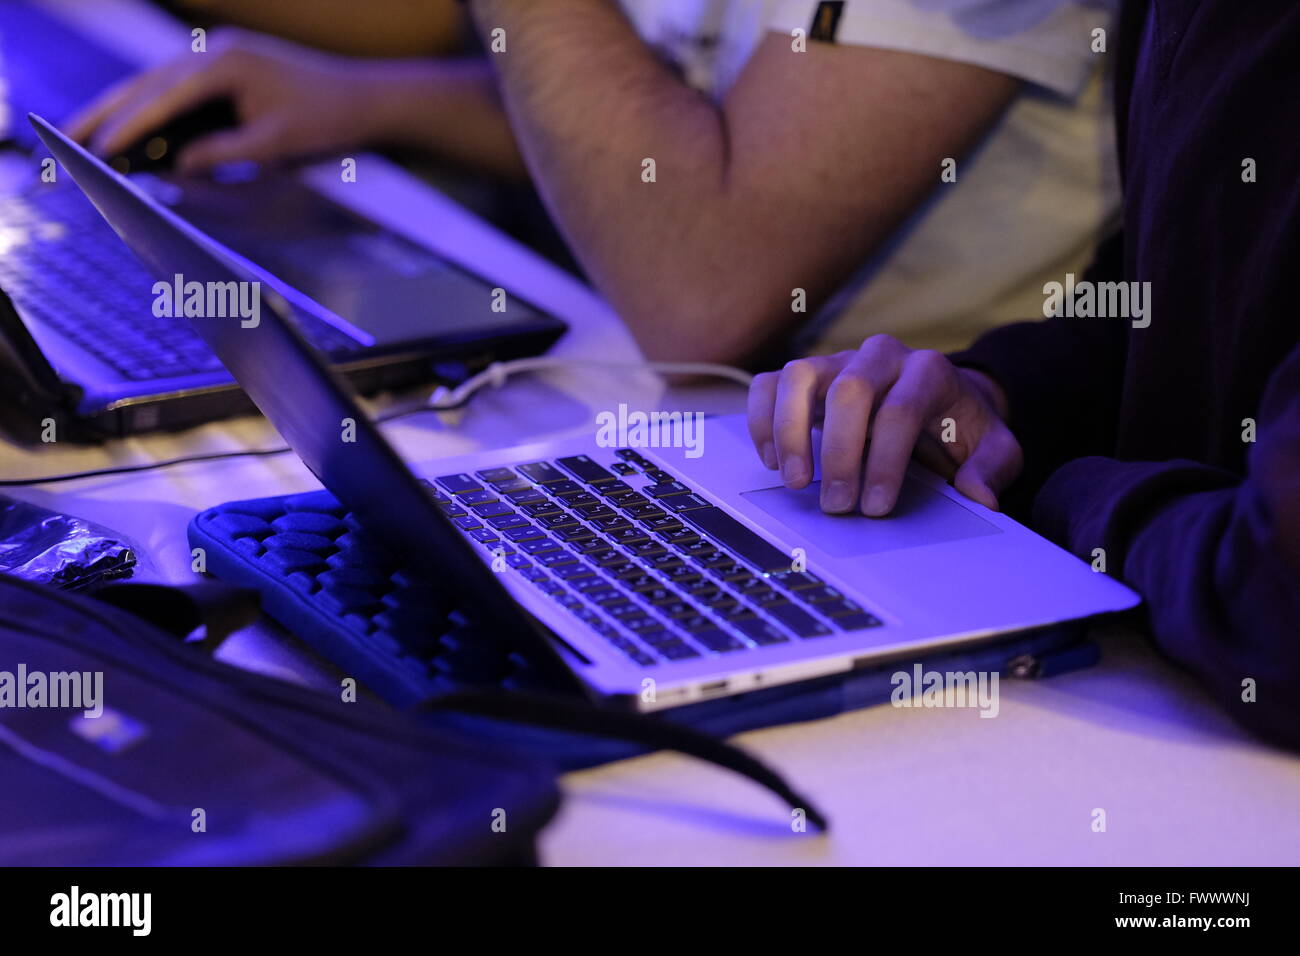 Jerusalem, Israel. 7th April, 2016. Young Israelis using laptop computers during Cyberknight Cyber Defense Challenge event in which teams compete against each other in stopping malicious hackers from invading vital infrastructures in a simulation game. Credit:  Eddie Gerald/Alamy Live News Stock Photo